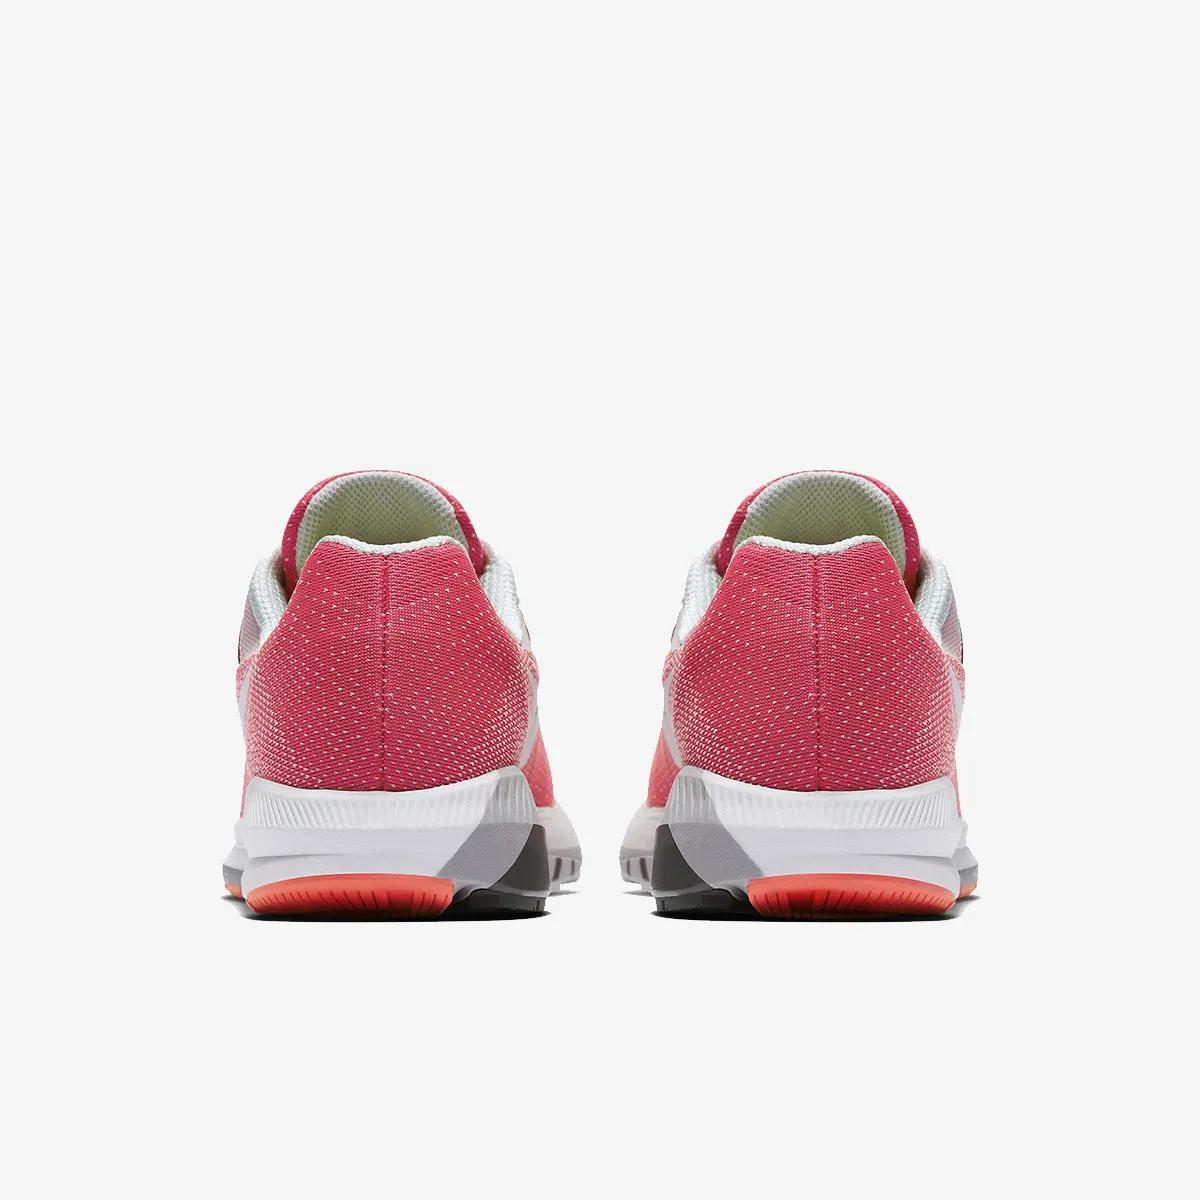 Nike WMNS AIR ZOOM STRUCTURE 20 